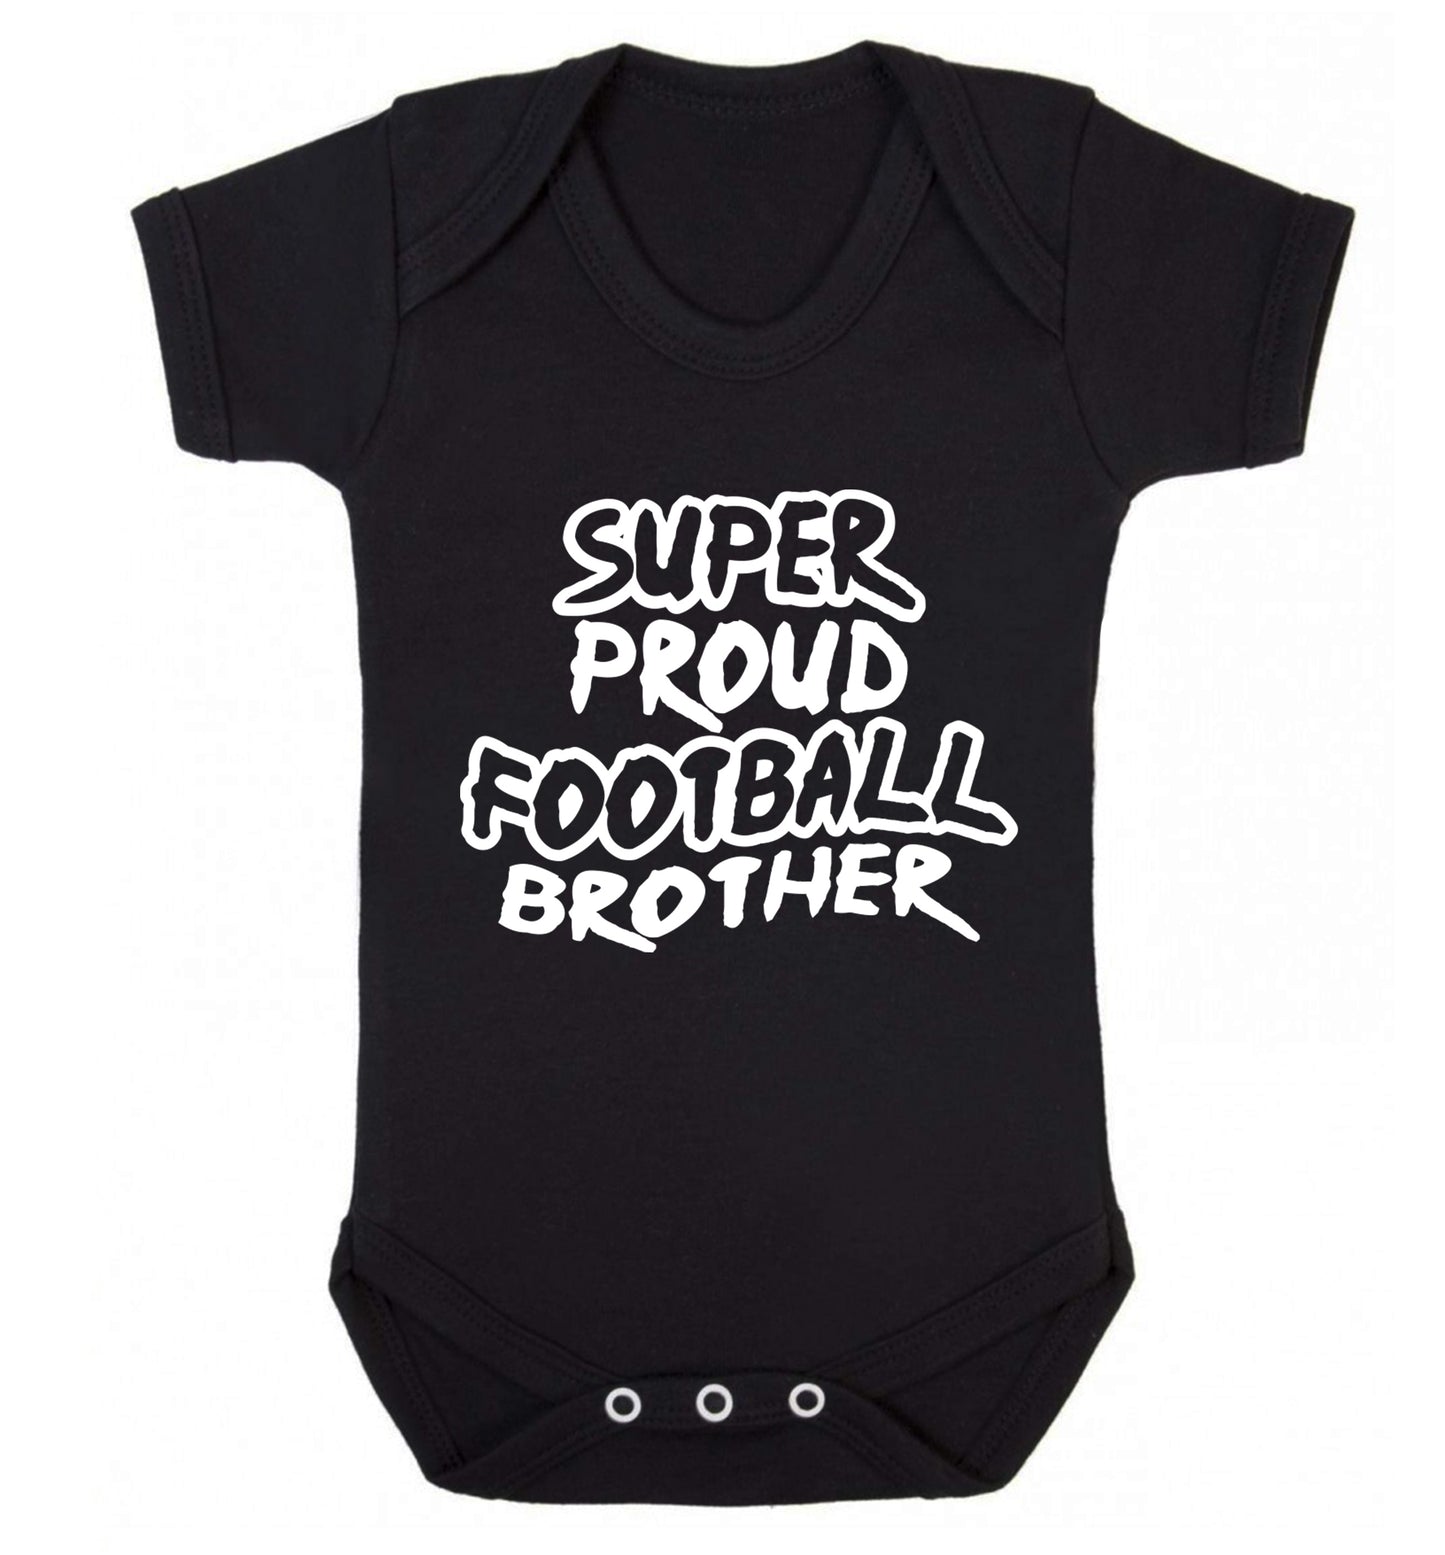 Super proud football brother Baby Vest black 18-24 months